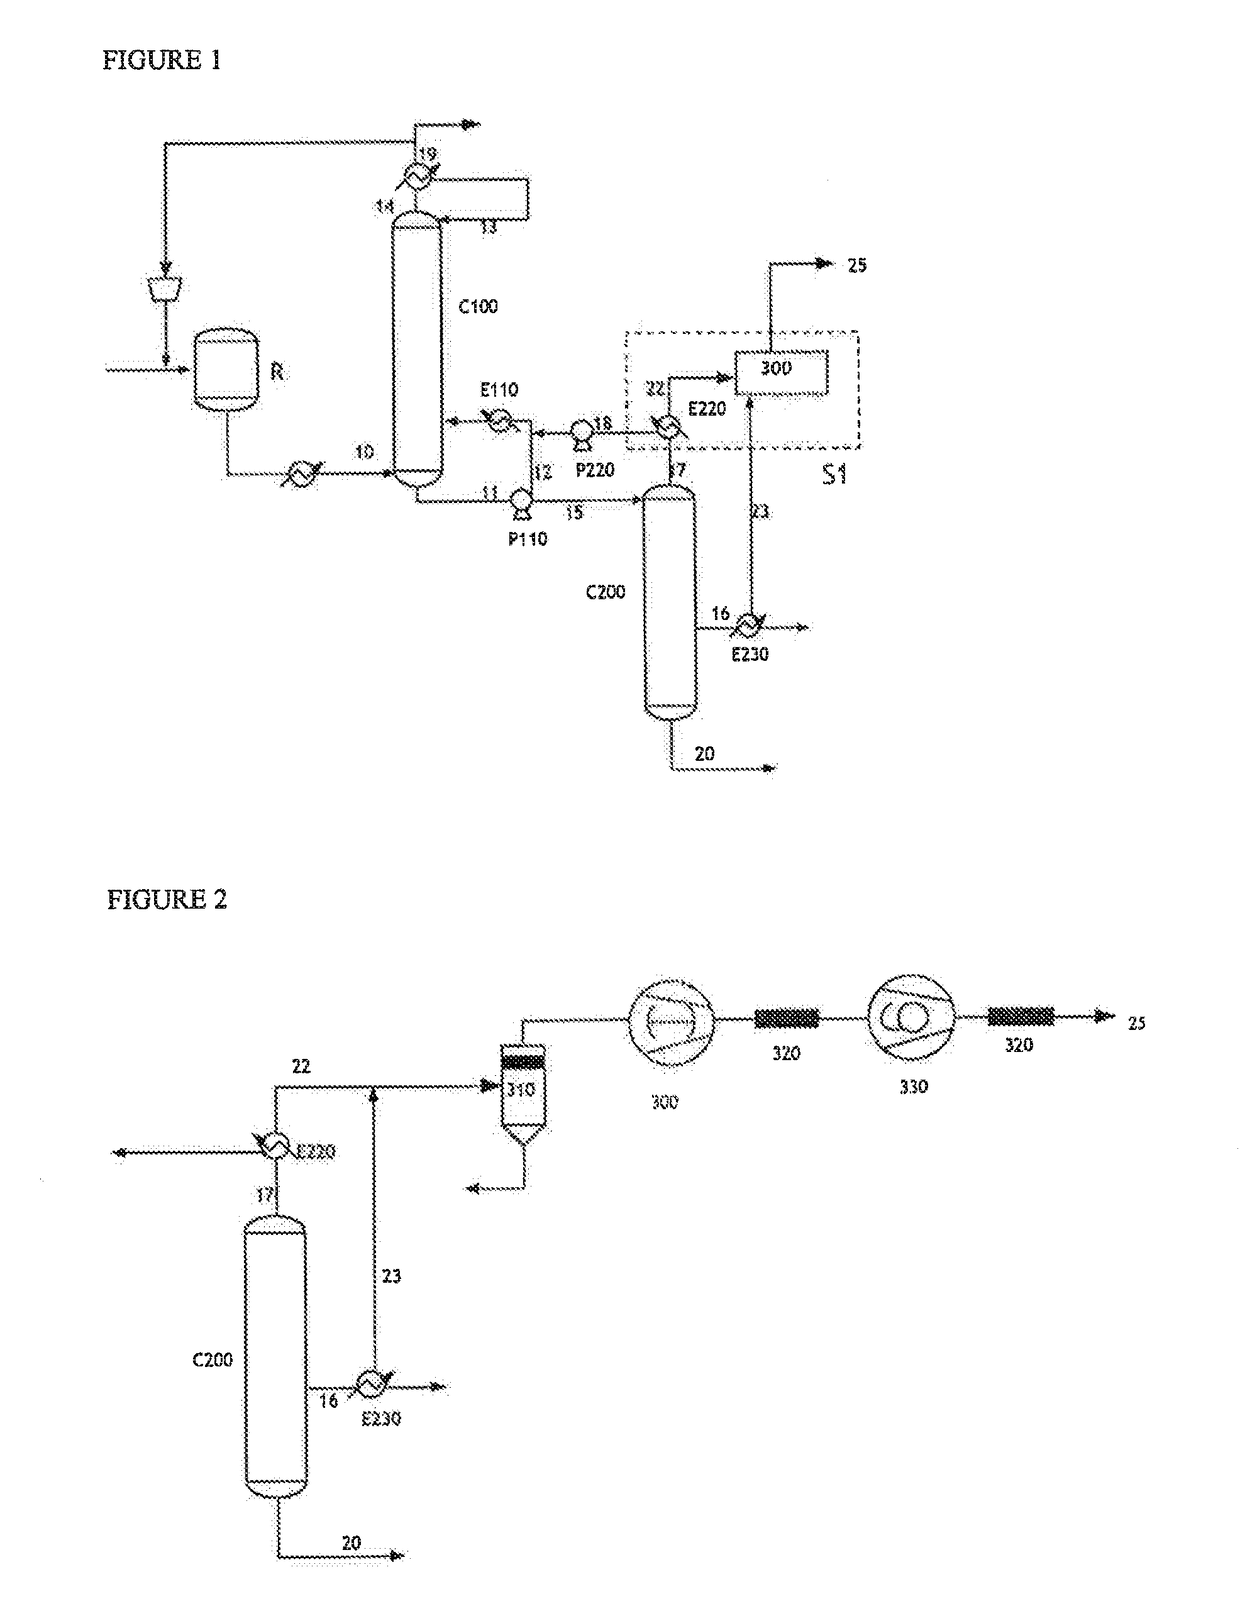 Improved process for producing (METH)acrylic acid